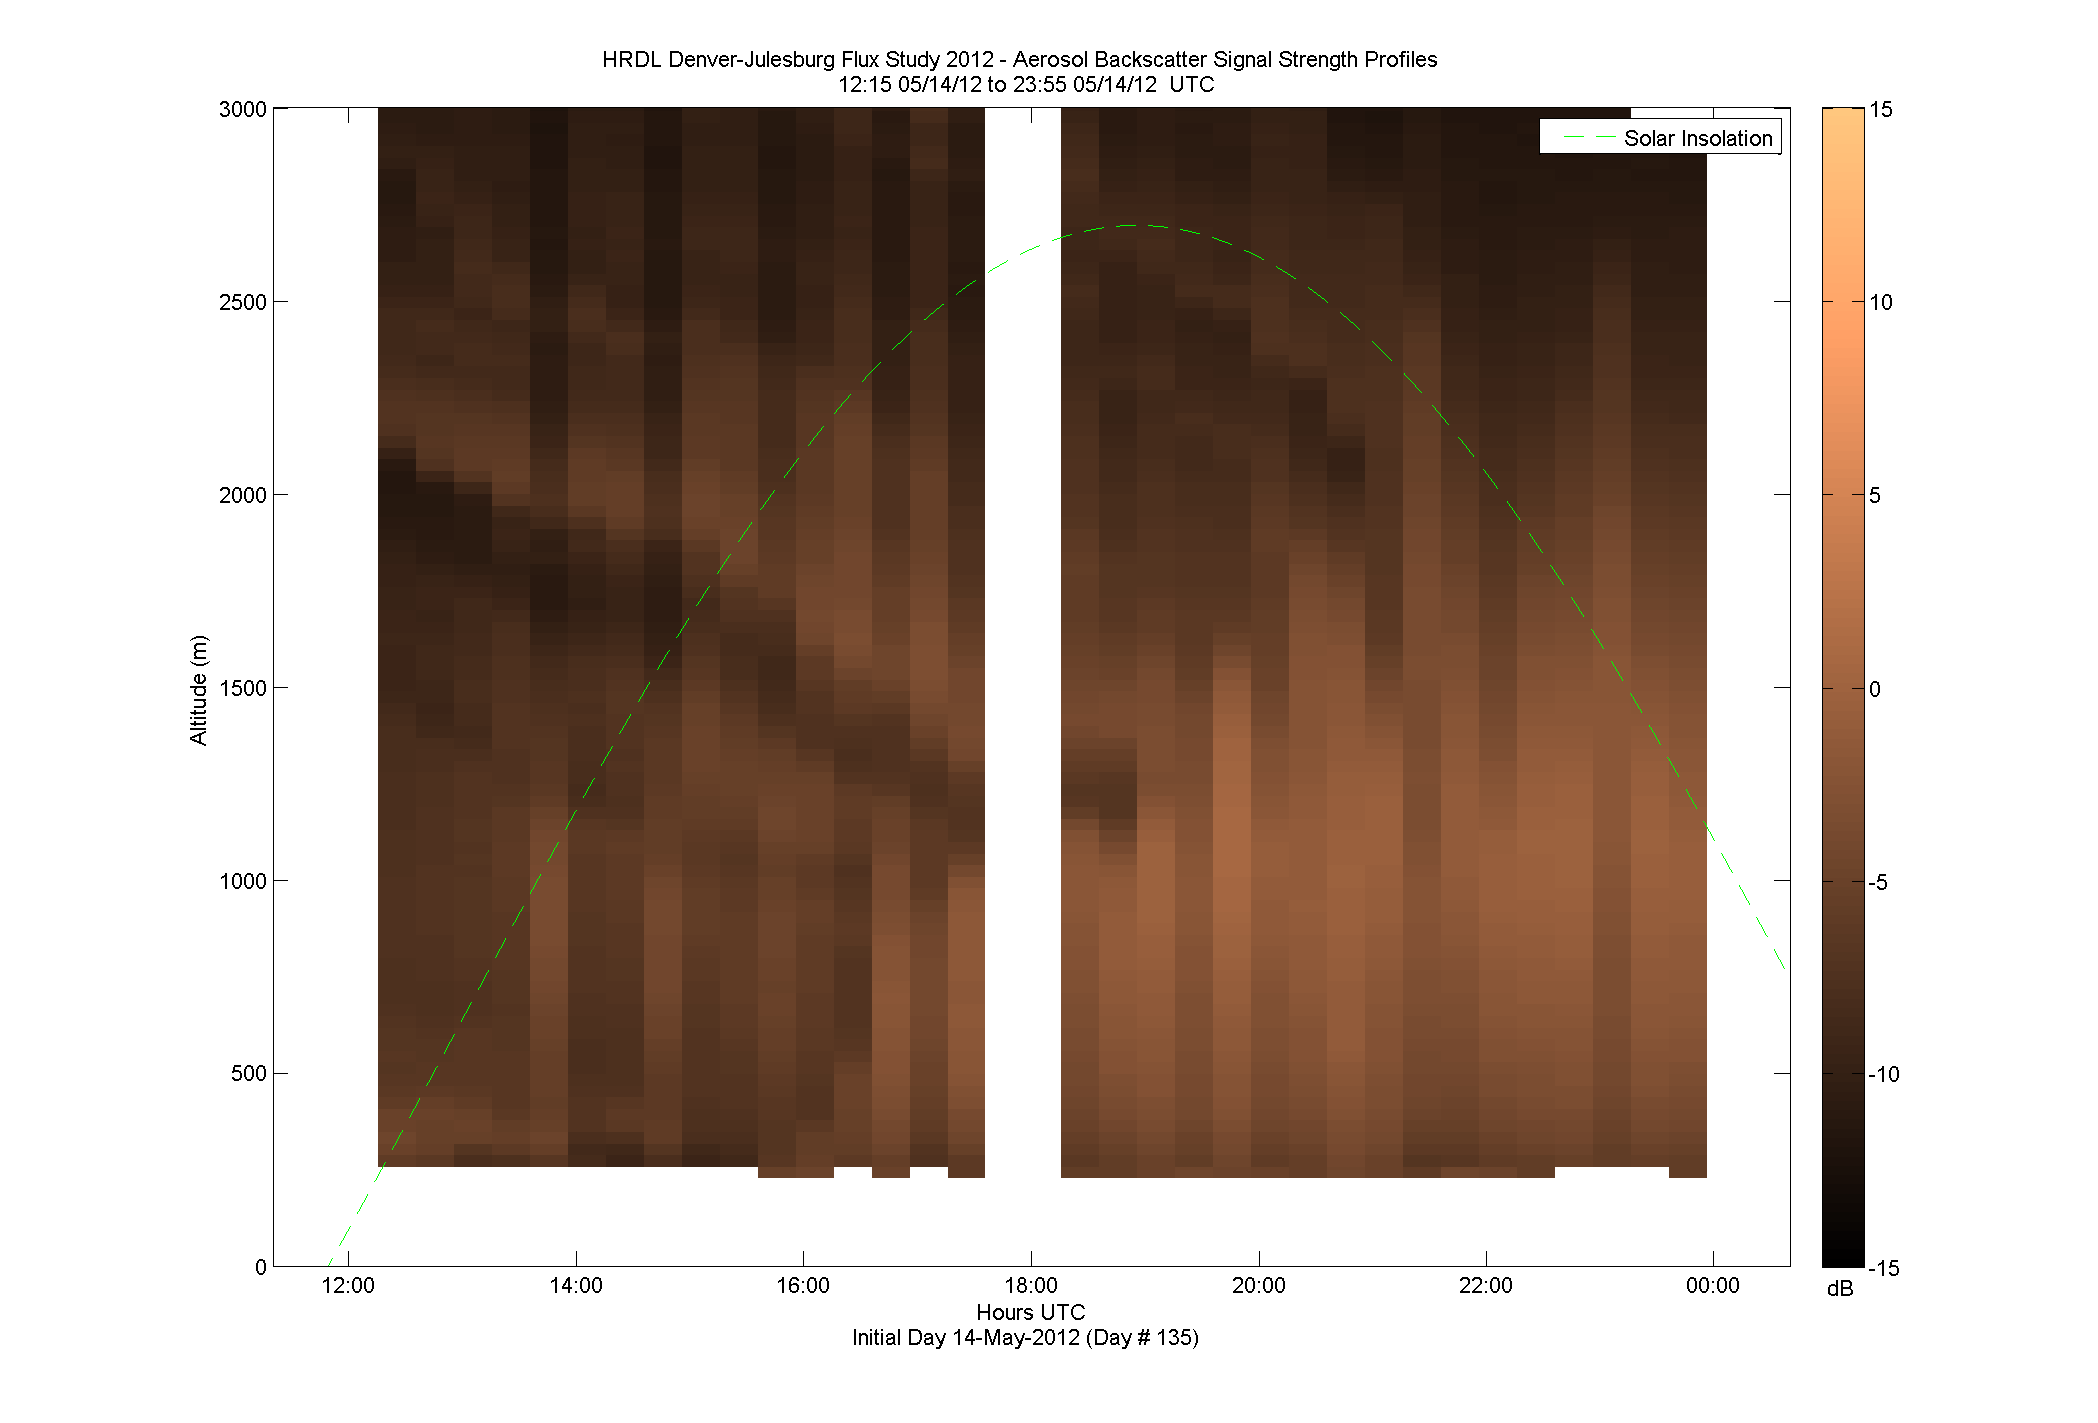 HRDL vertical intensity profile - May 14 pm